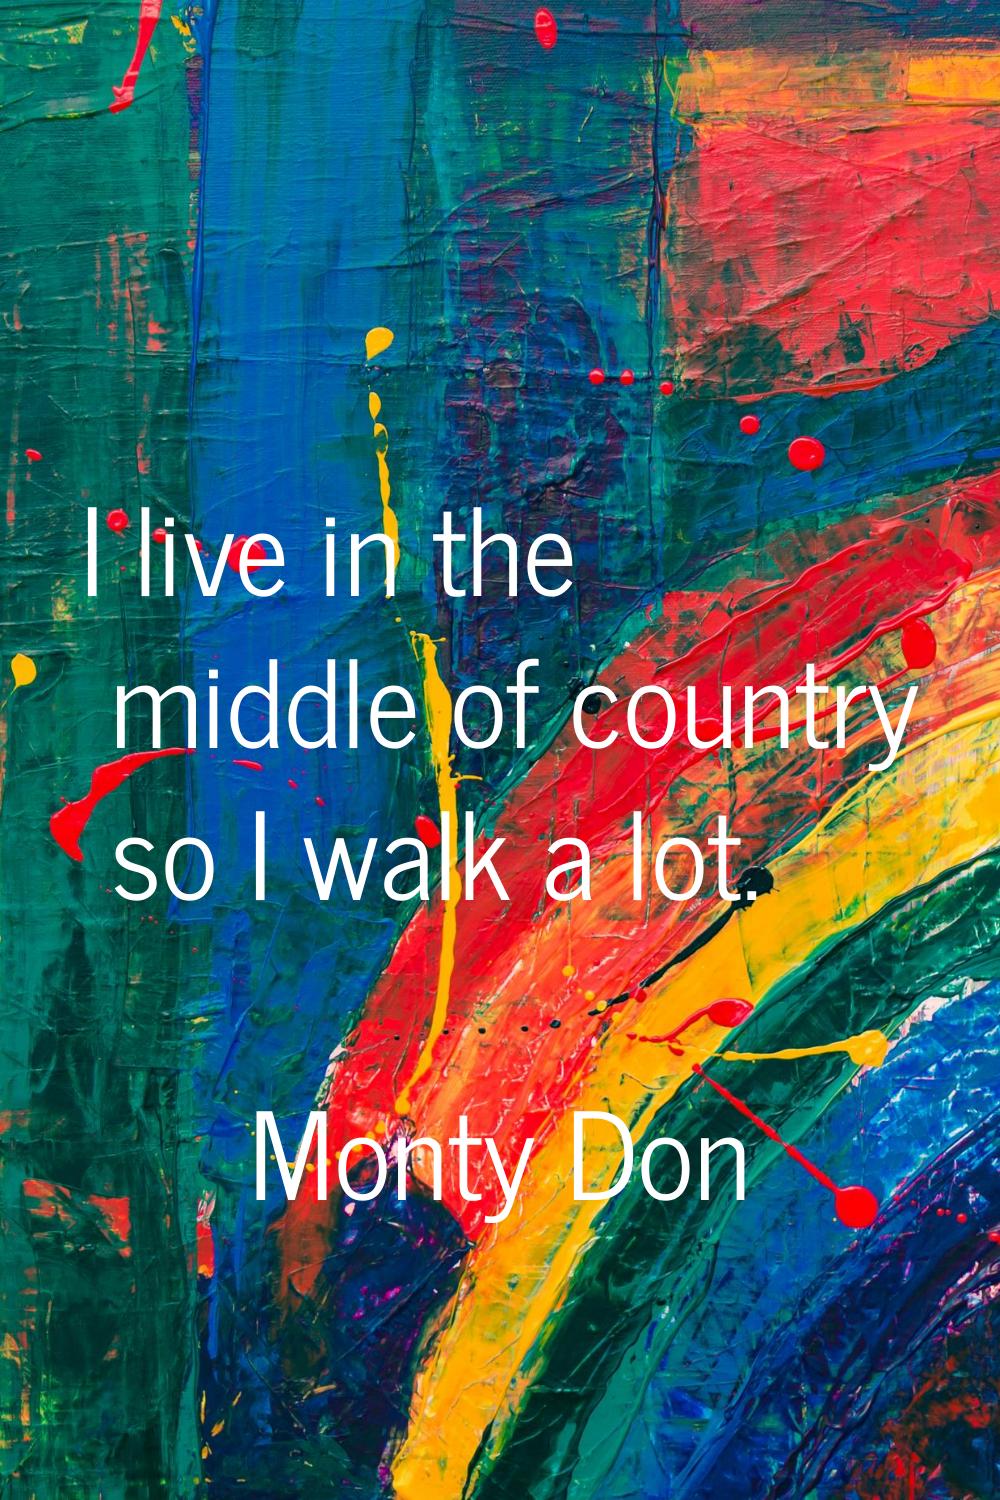 I live in the middle of country so I walk a lot.